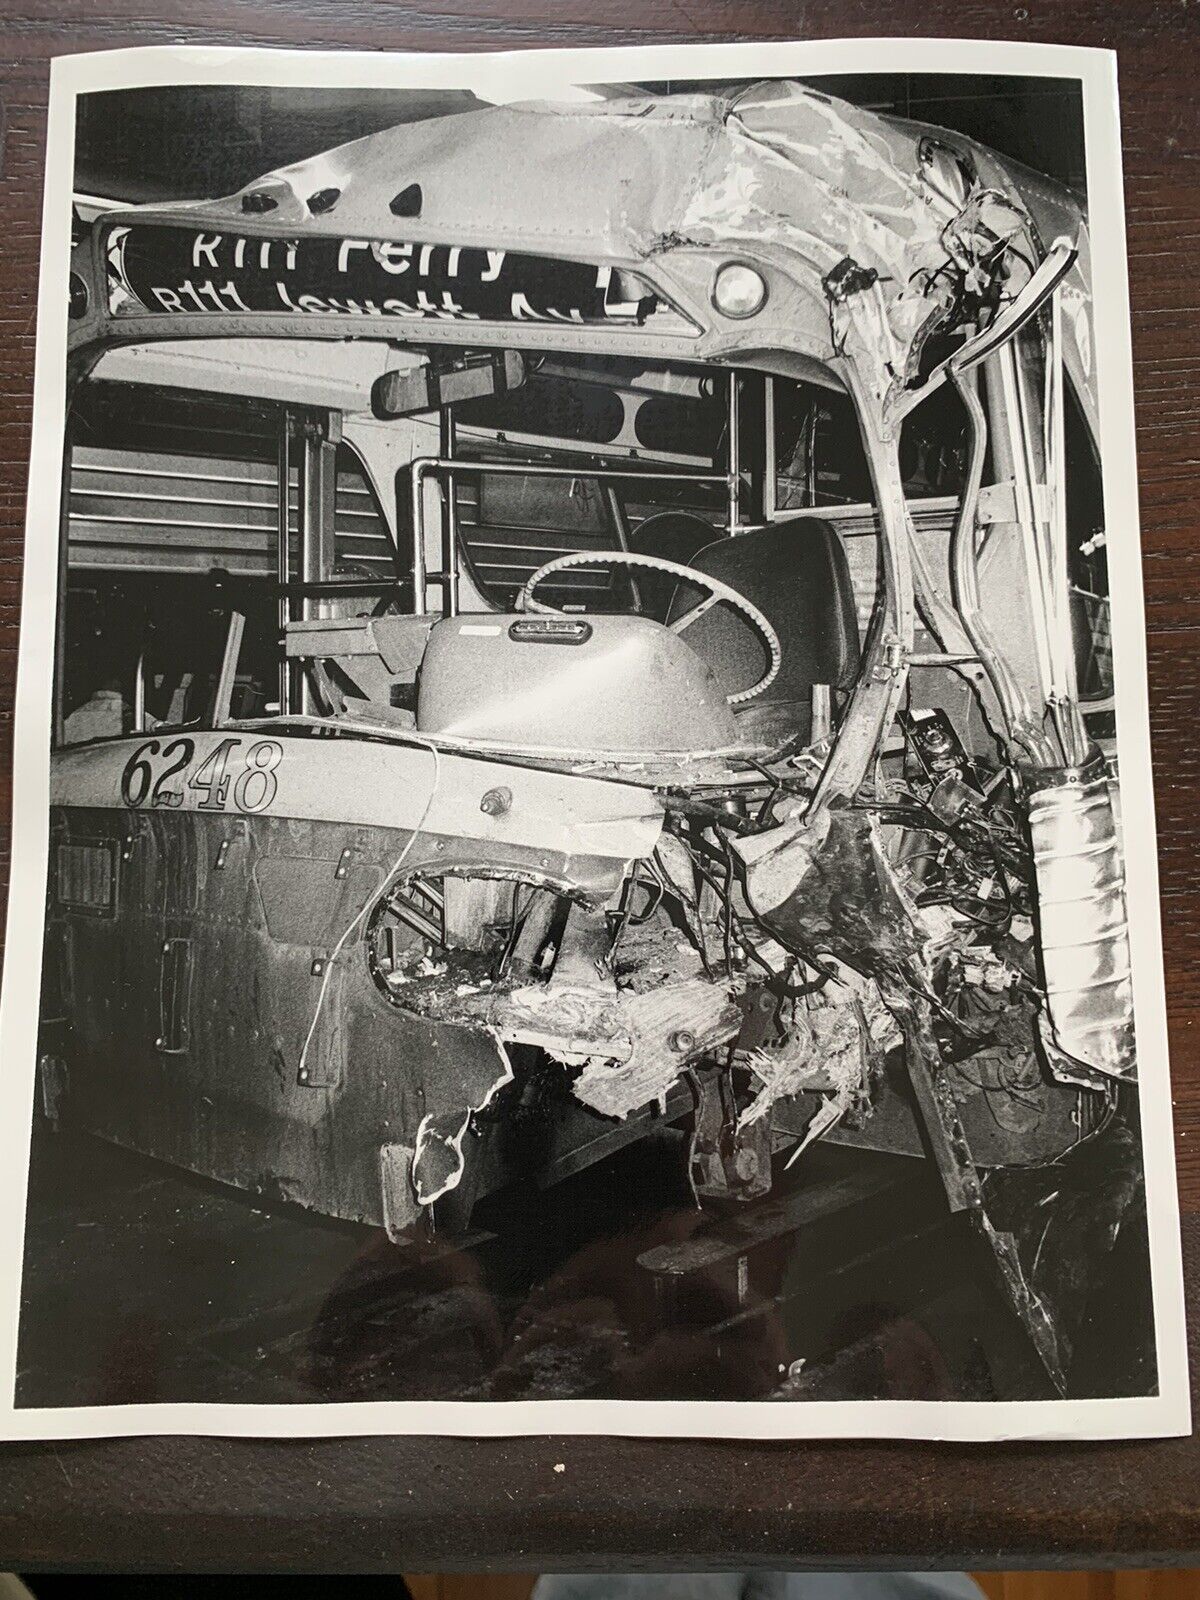 8X10 NY NYC SURFACE TRANSIT BUS #6248 FERRY B&W 1976 CAR ACCIDENT NEW YORK CITY